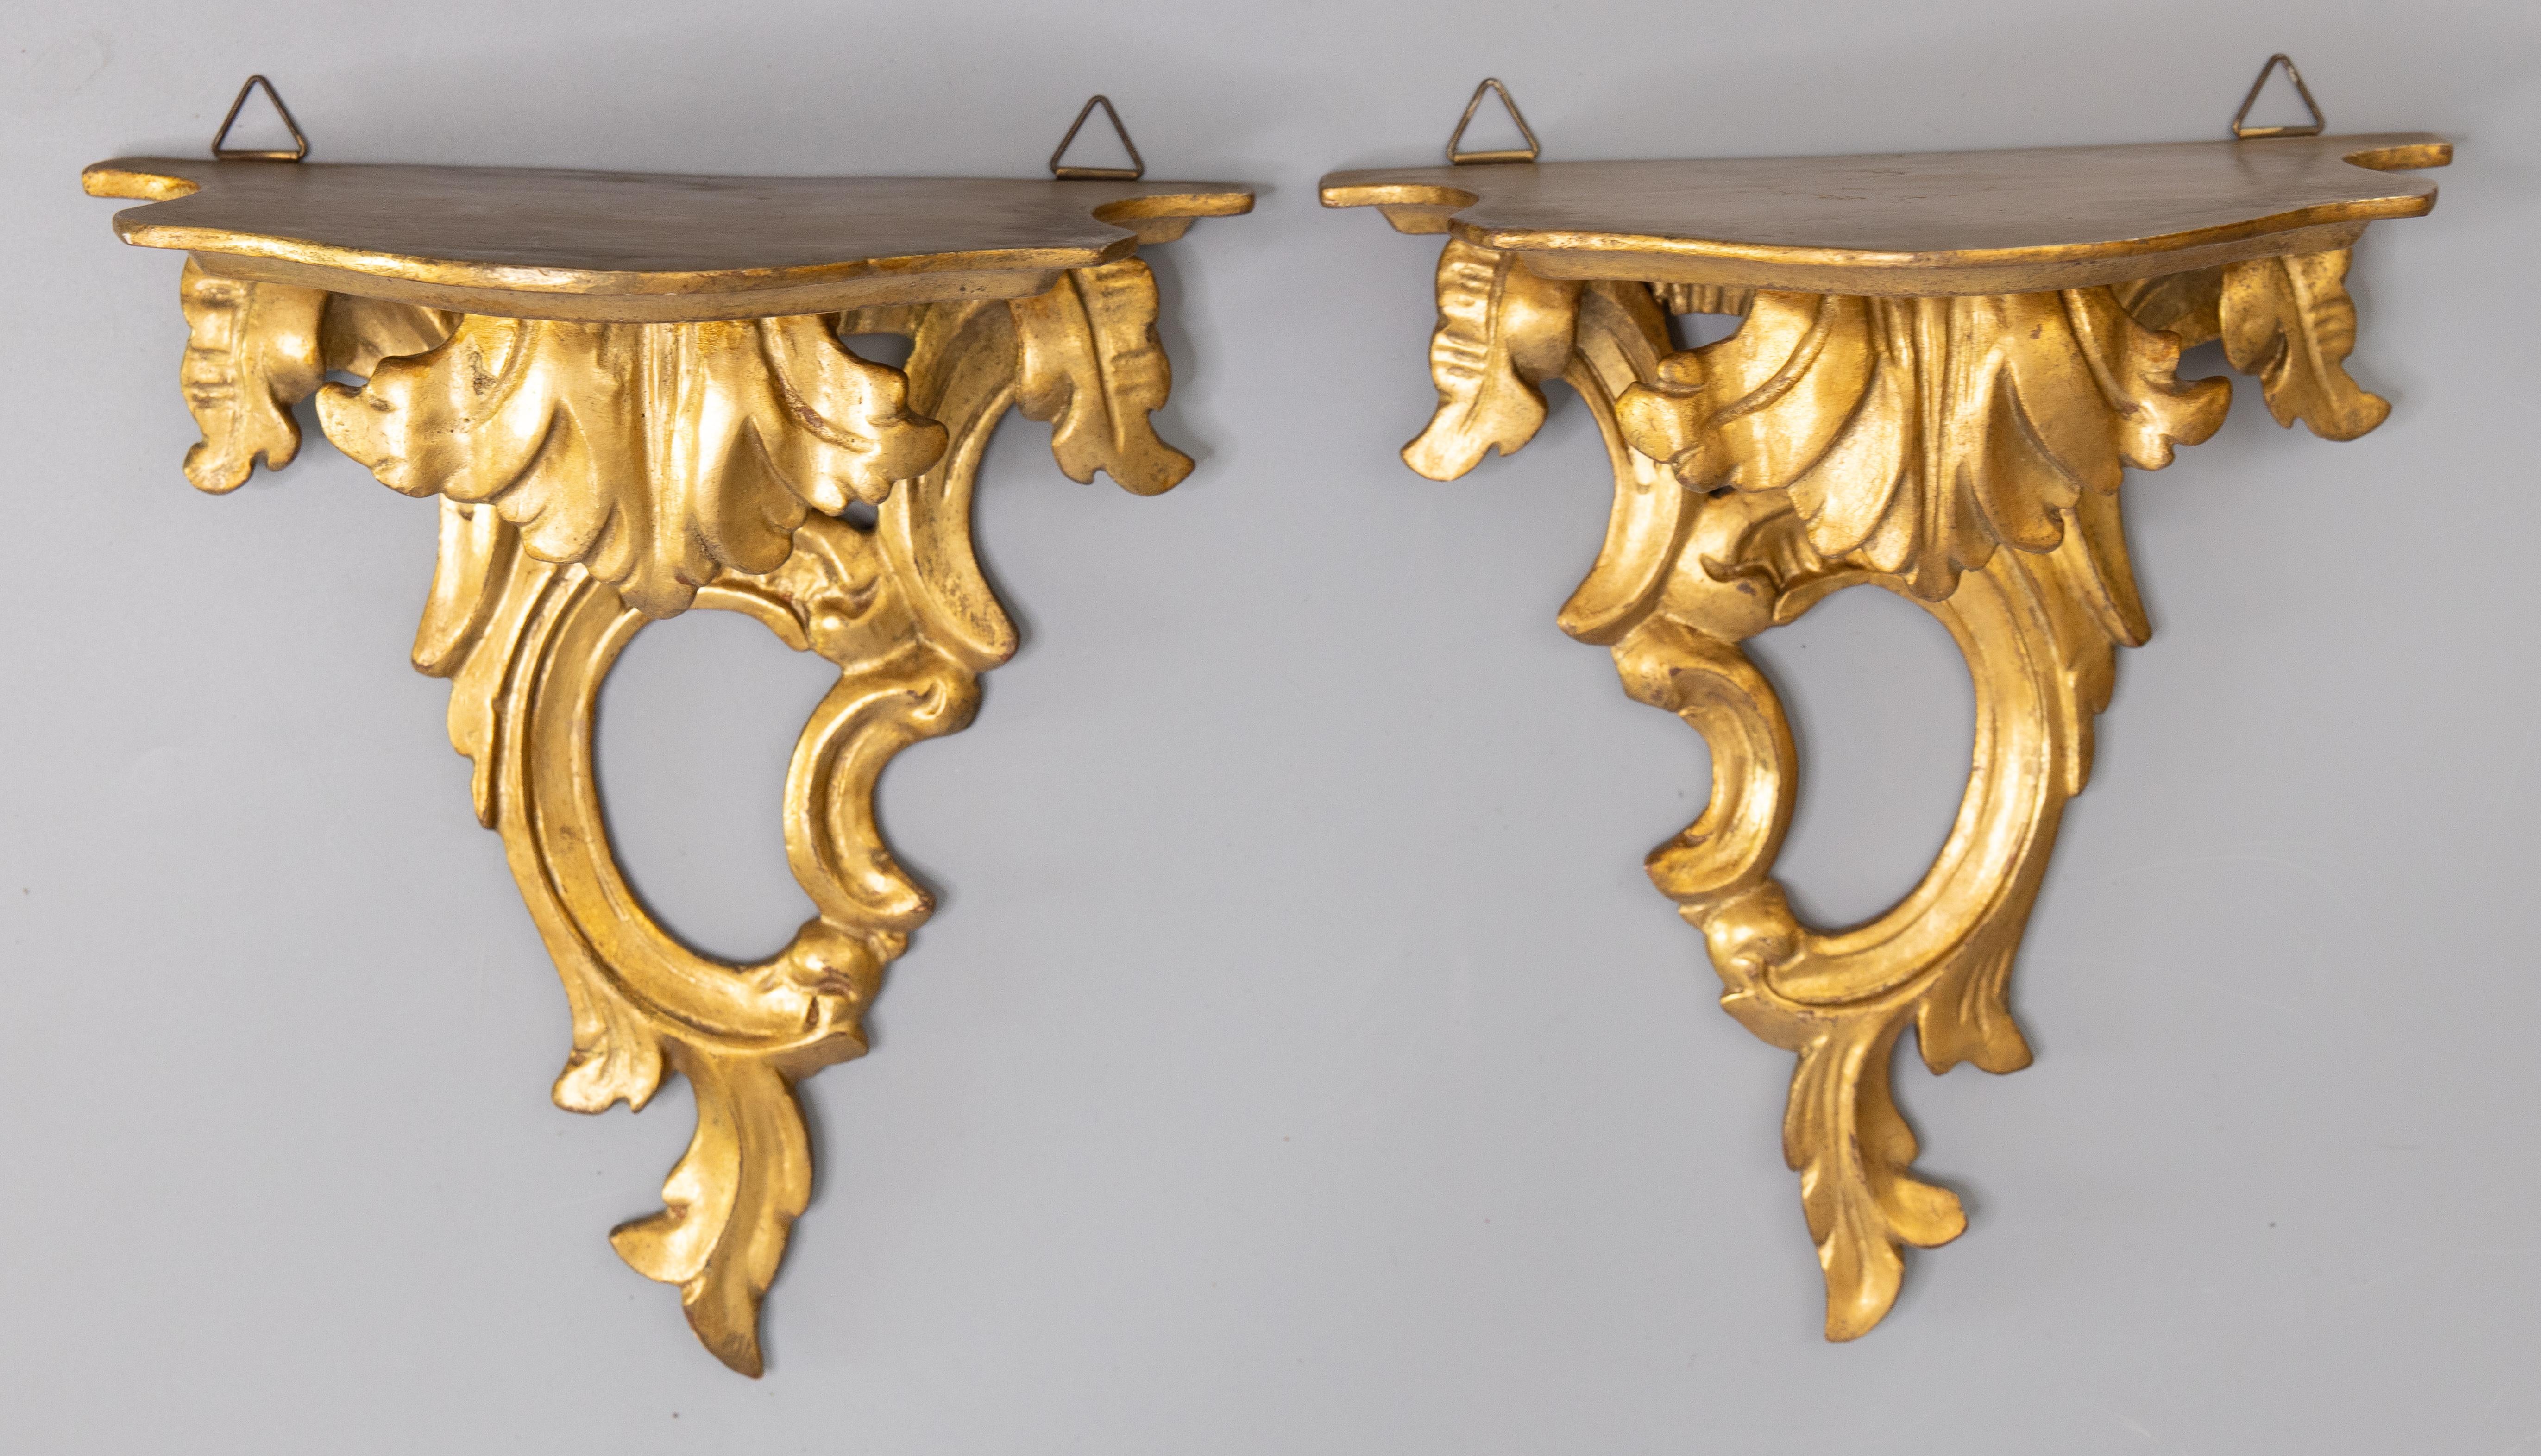 Pair of Mid-20th Century Italian Carved Giltwood Wall Brackets Shelves 1